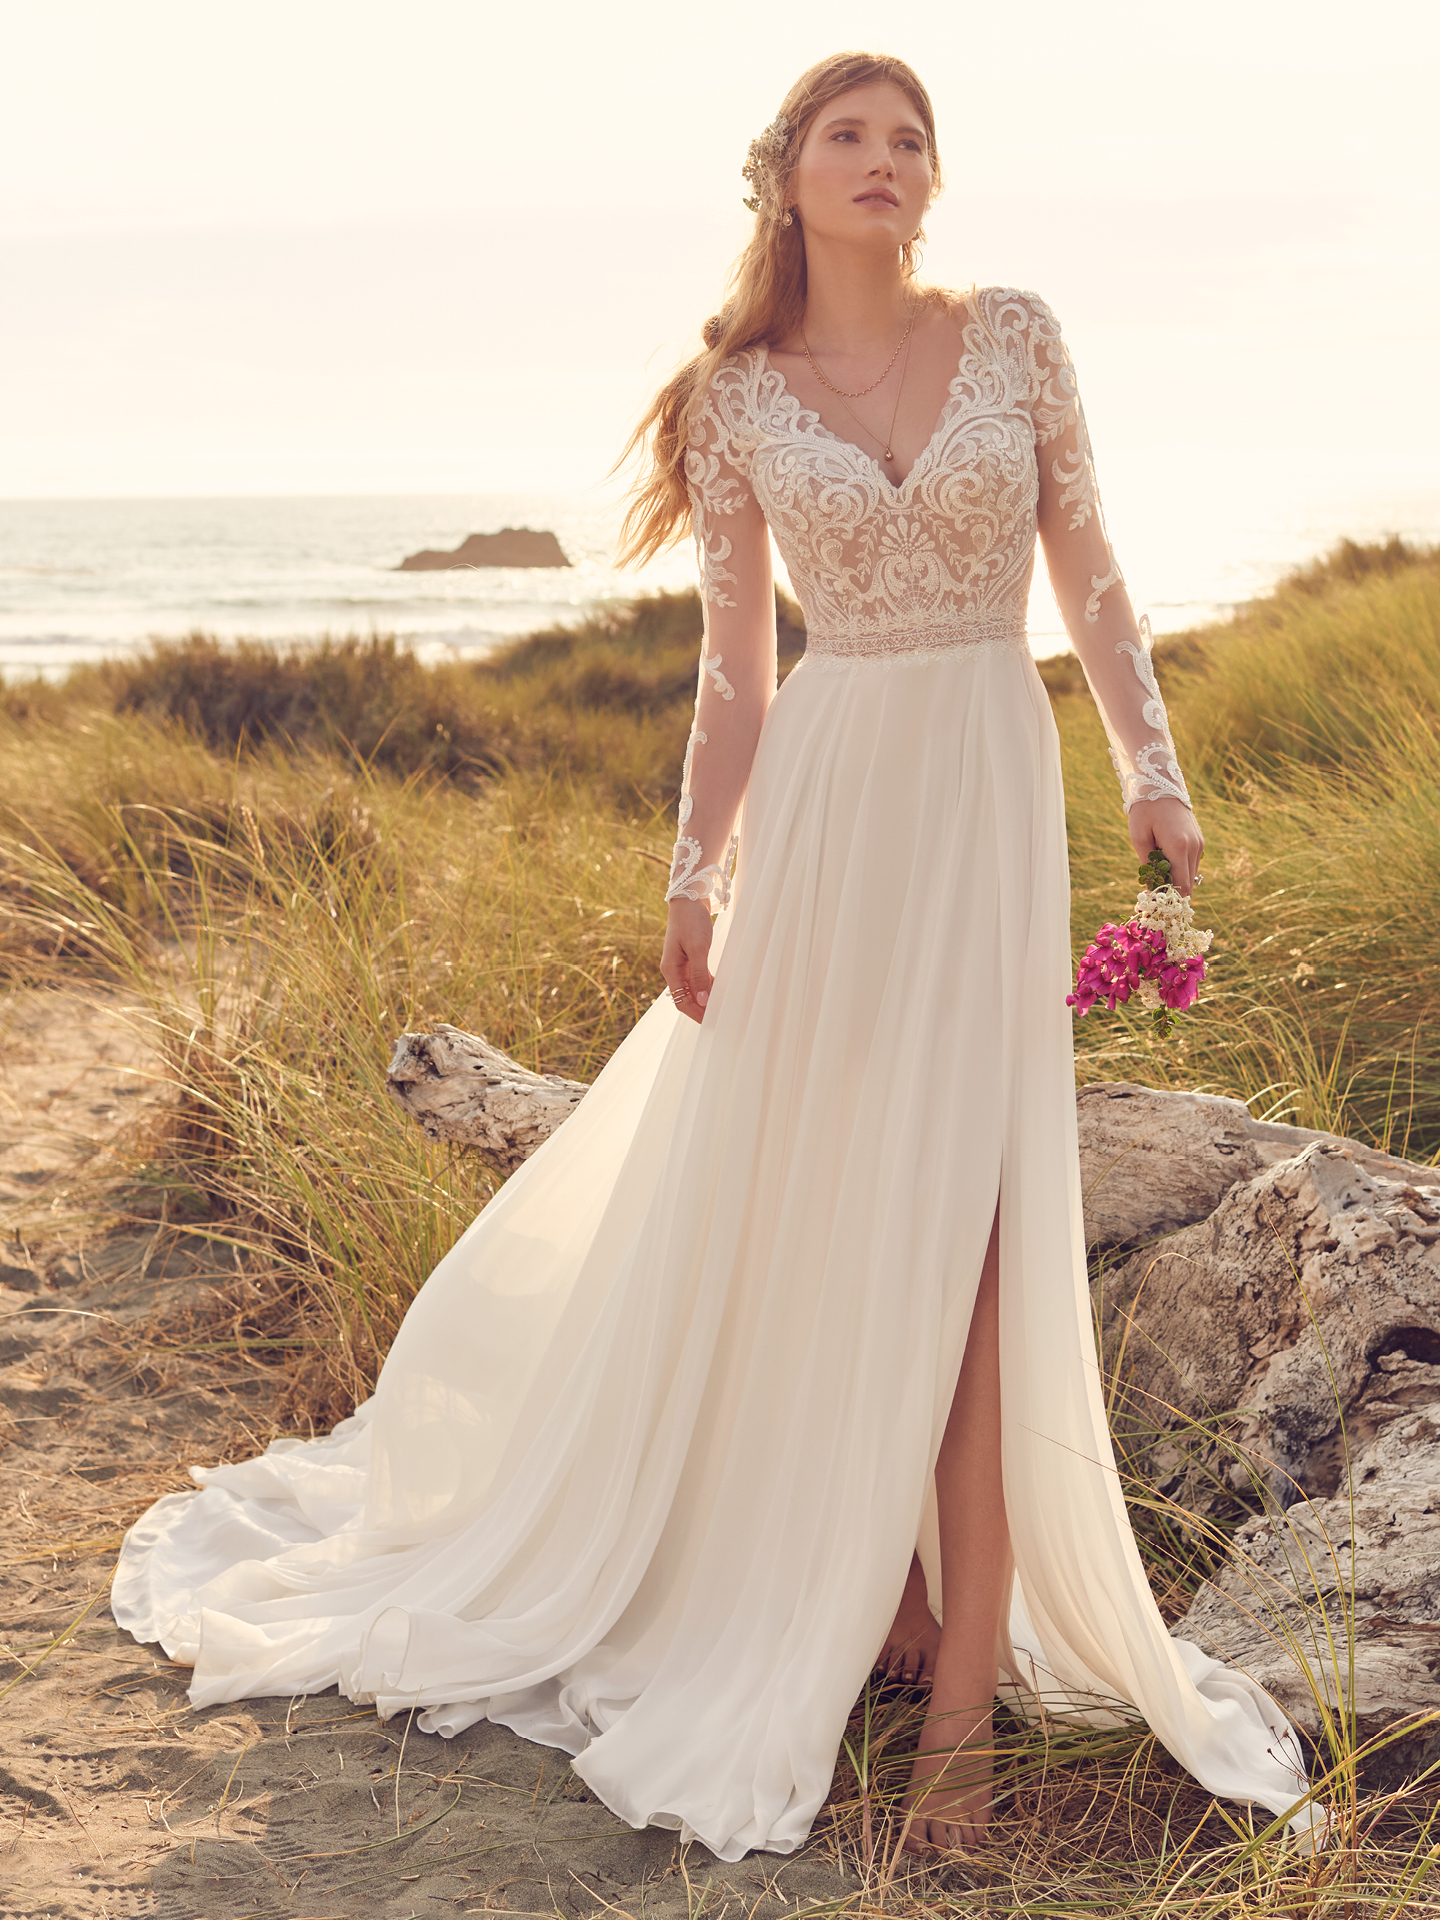 Bride In Quick Delivery Lace Wedding Dress Called Lorraine Dawn By Rebecca Ingram